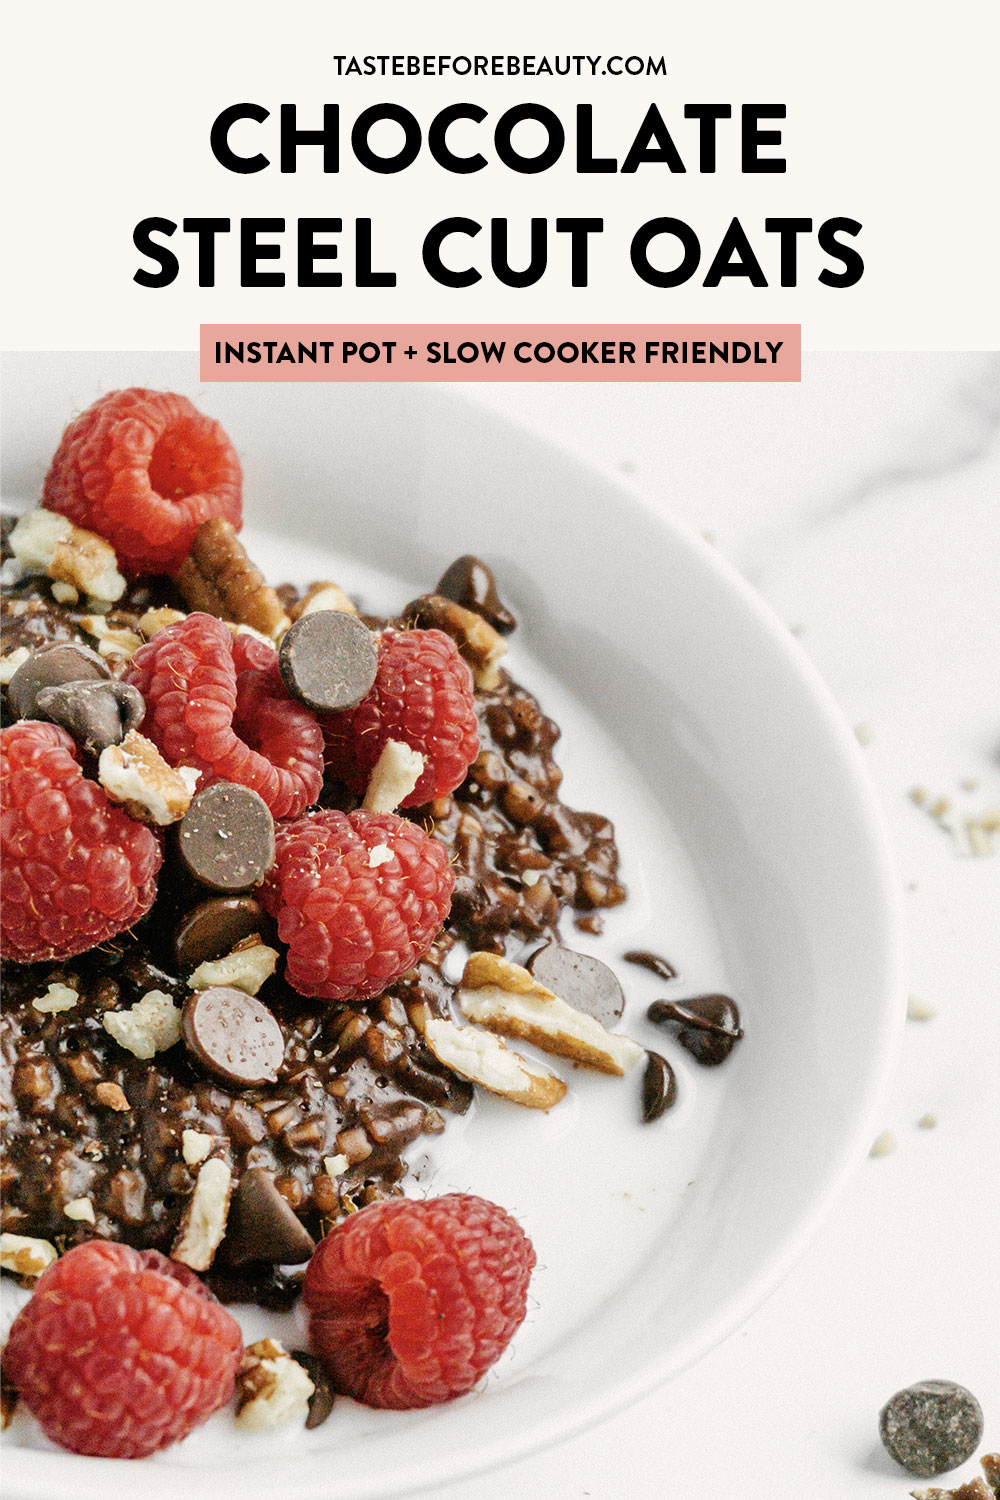 taste before beauty chocolate steel cut oats on table with raspberries pinterest pin